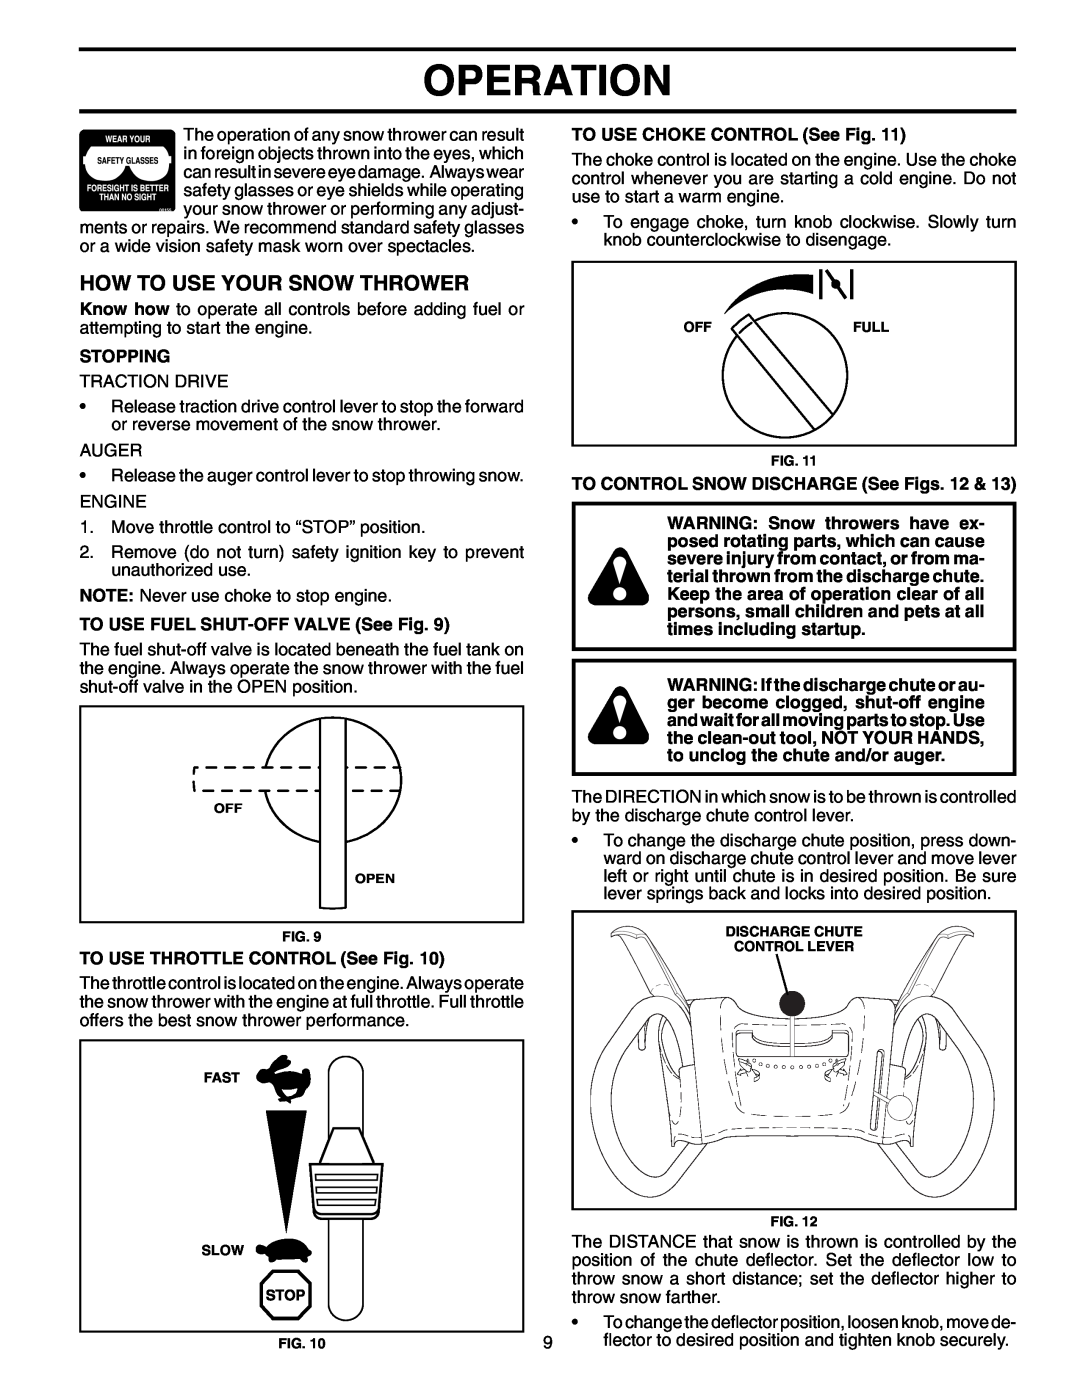 Poulan PP7527ES owner manual How To Use Your Snow Thrower, Operation, TO USE CHOKE CONTROL See Fig, Stopping 